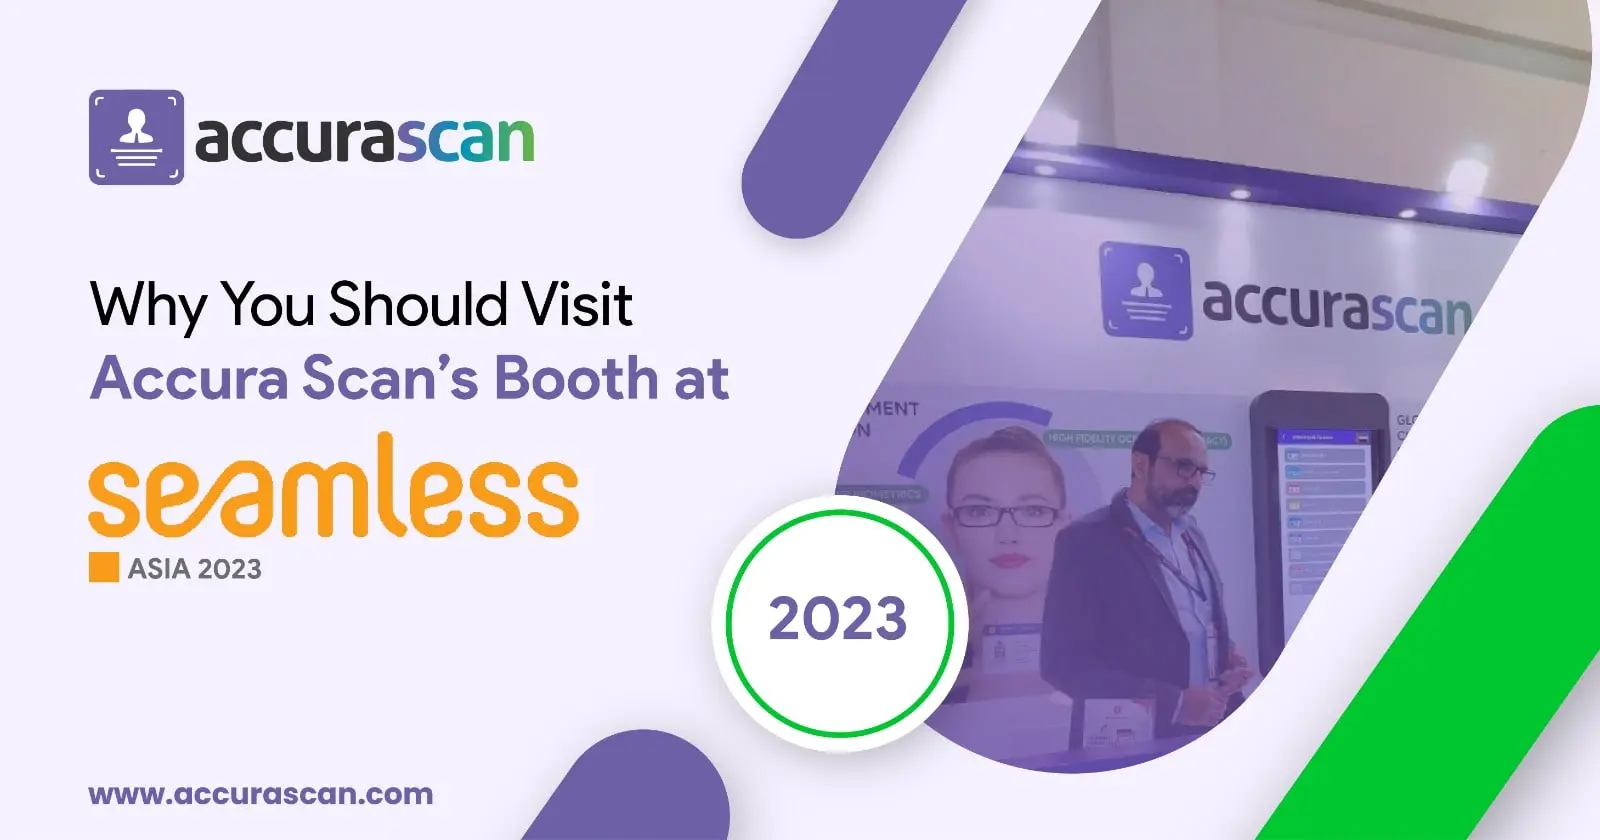 Why You Should Visit Accura Scan’s Booth at Seamless Asia 2023